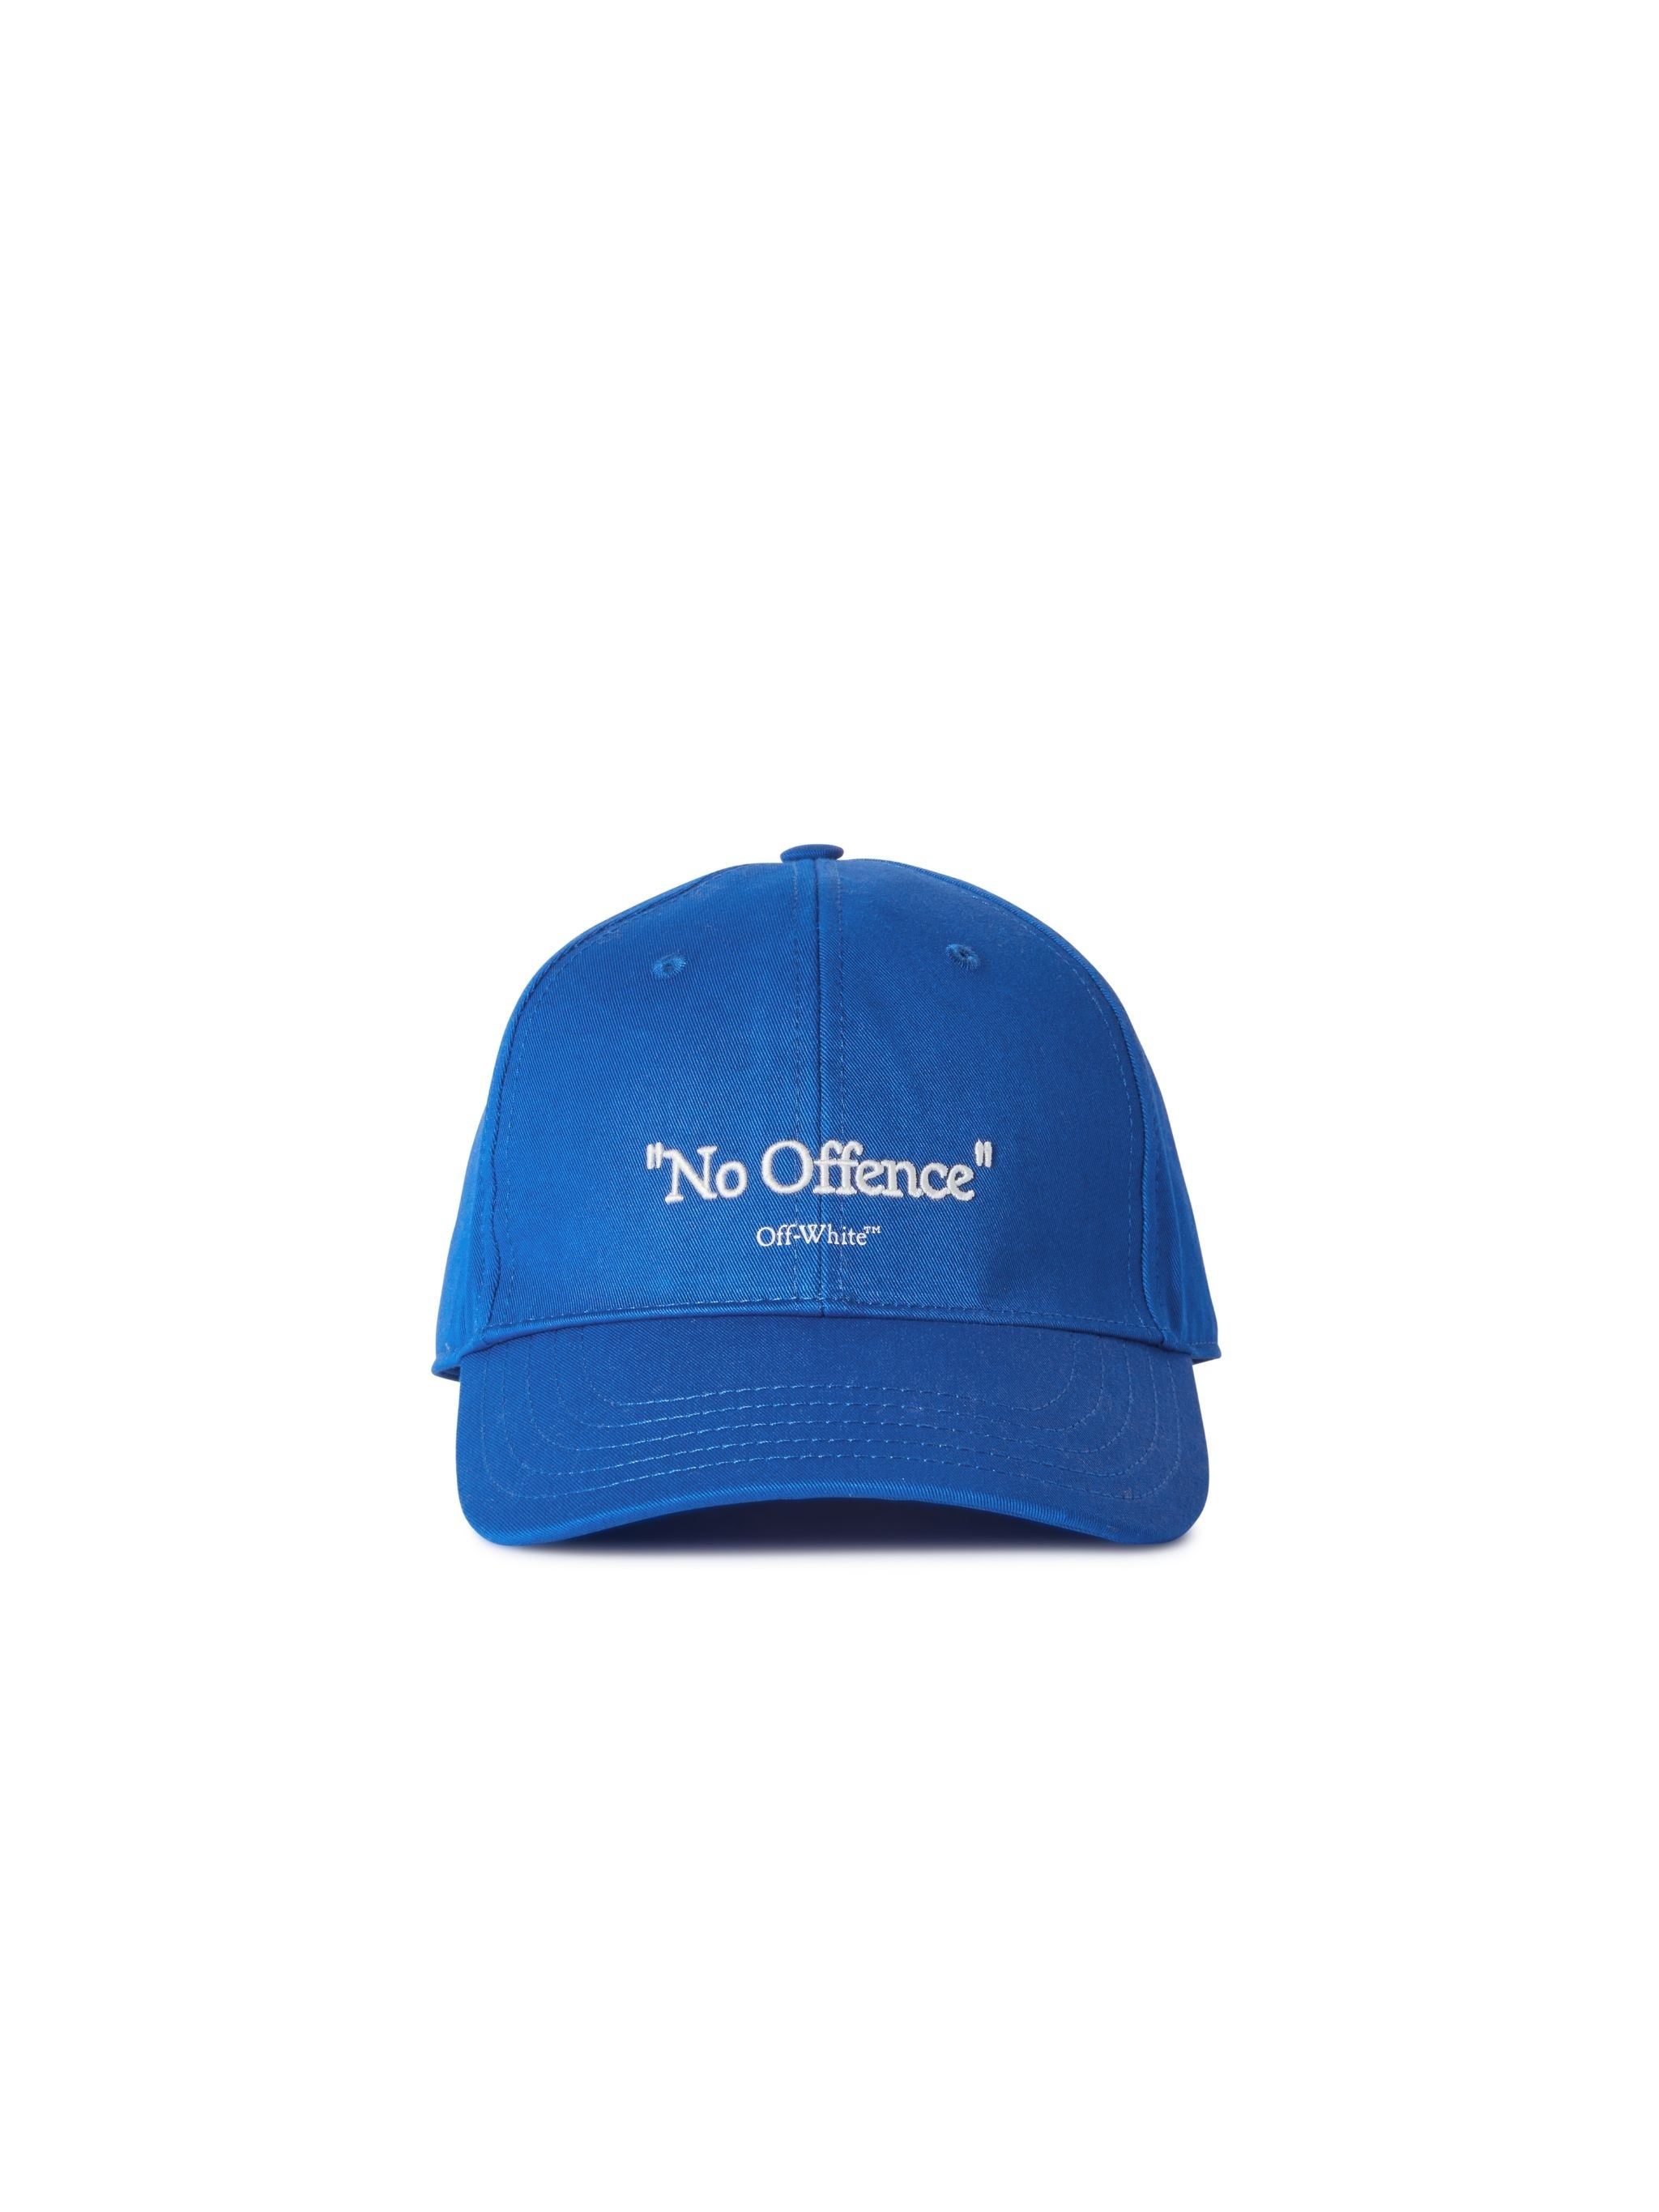 Drill No Offence Baseball Cap Blue White - 1